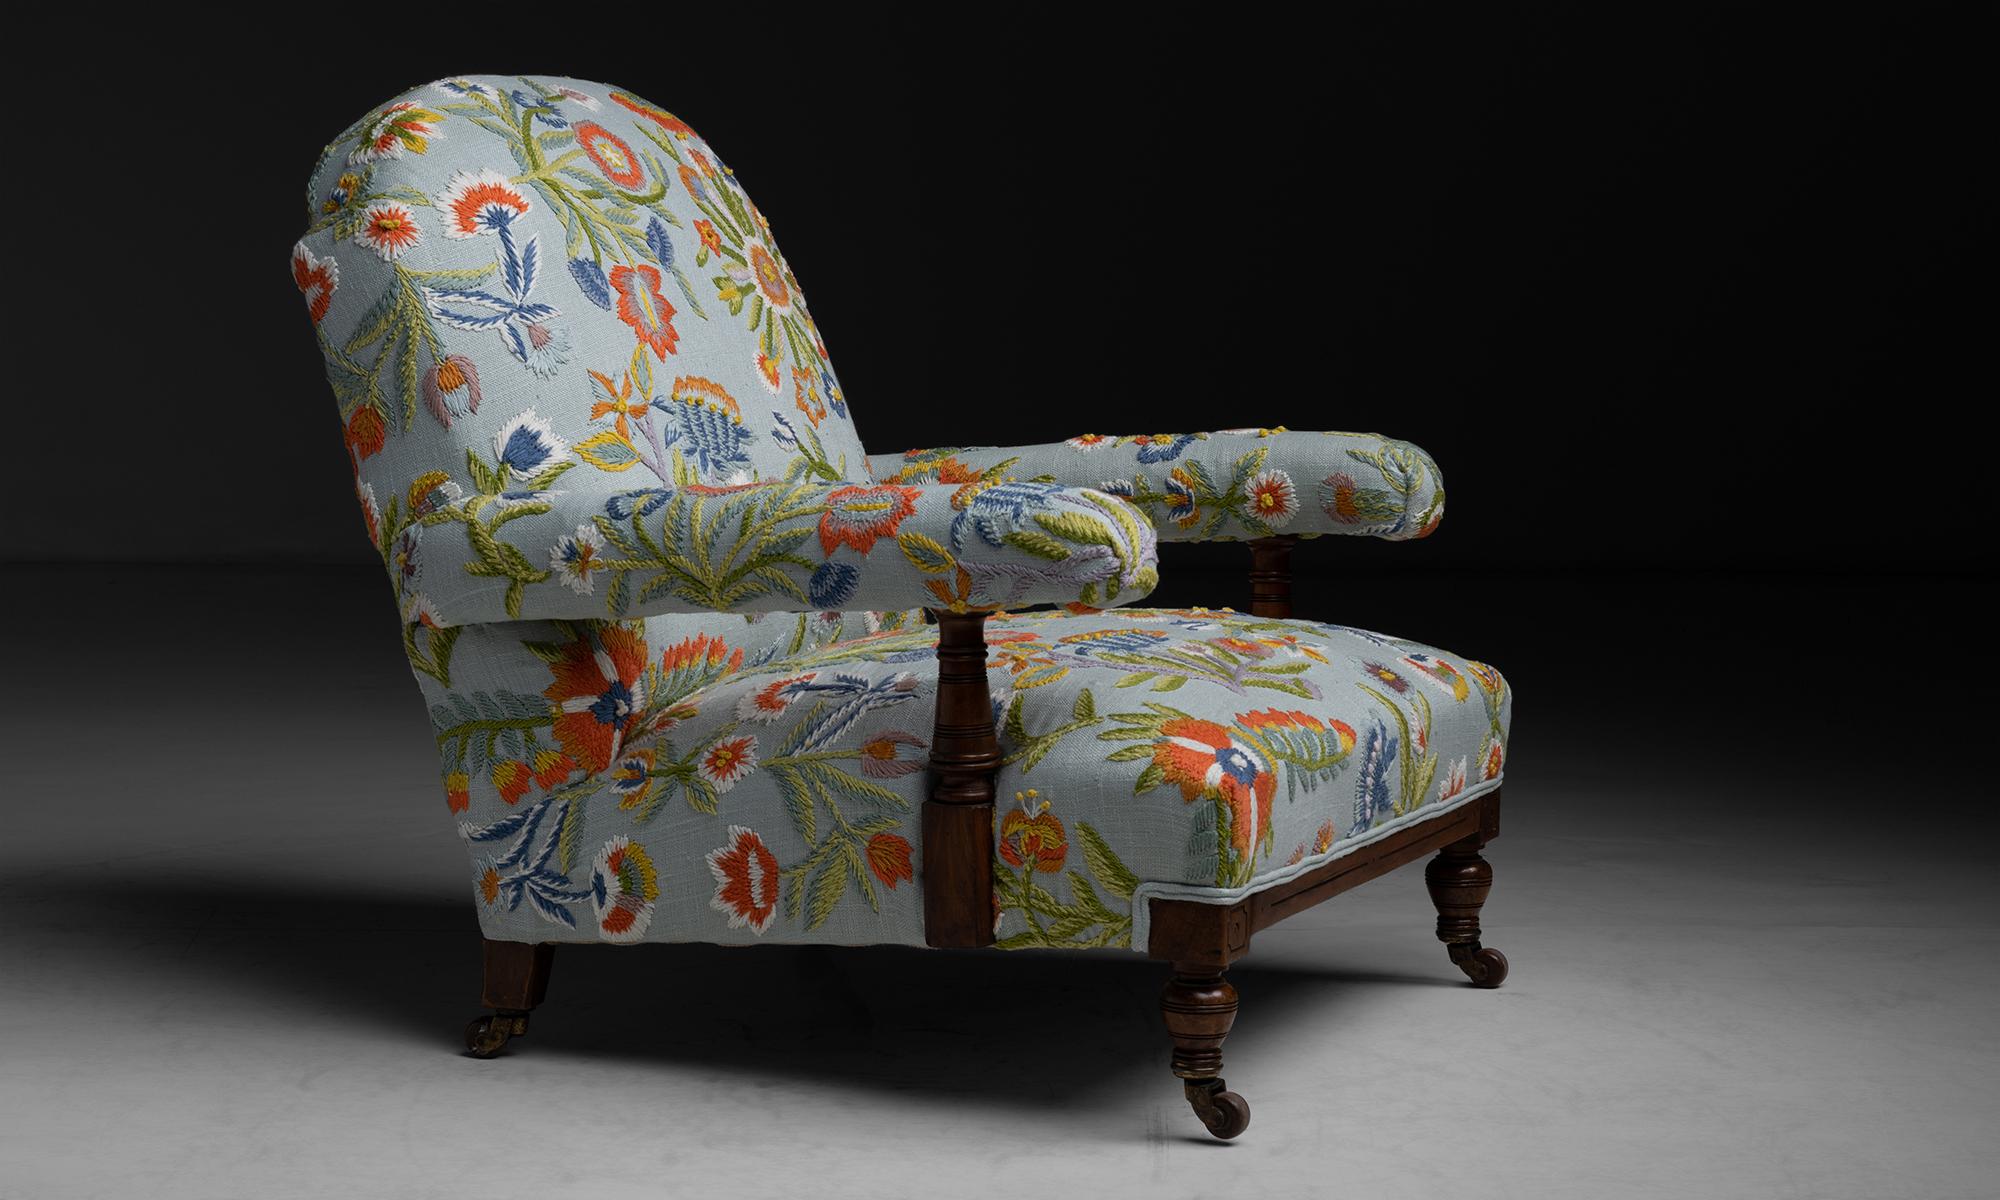 Howard Style Open Arm Library Chair in Embroidered Fabric by Pierre Frey
England circa 1890

Newly upholstered in fabric by Pierre Frey on antique frame.

Measures 30”W x 35”D x 31.5”H x 13”seat.